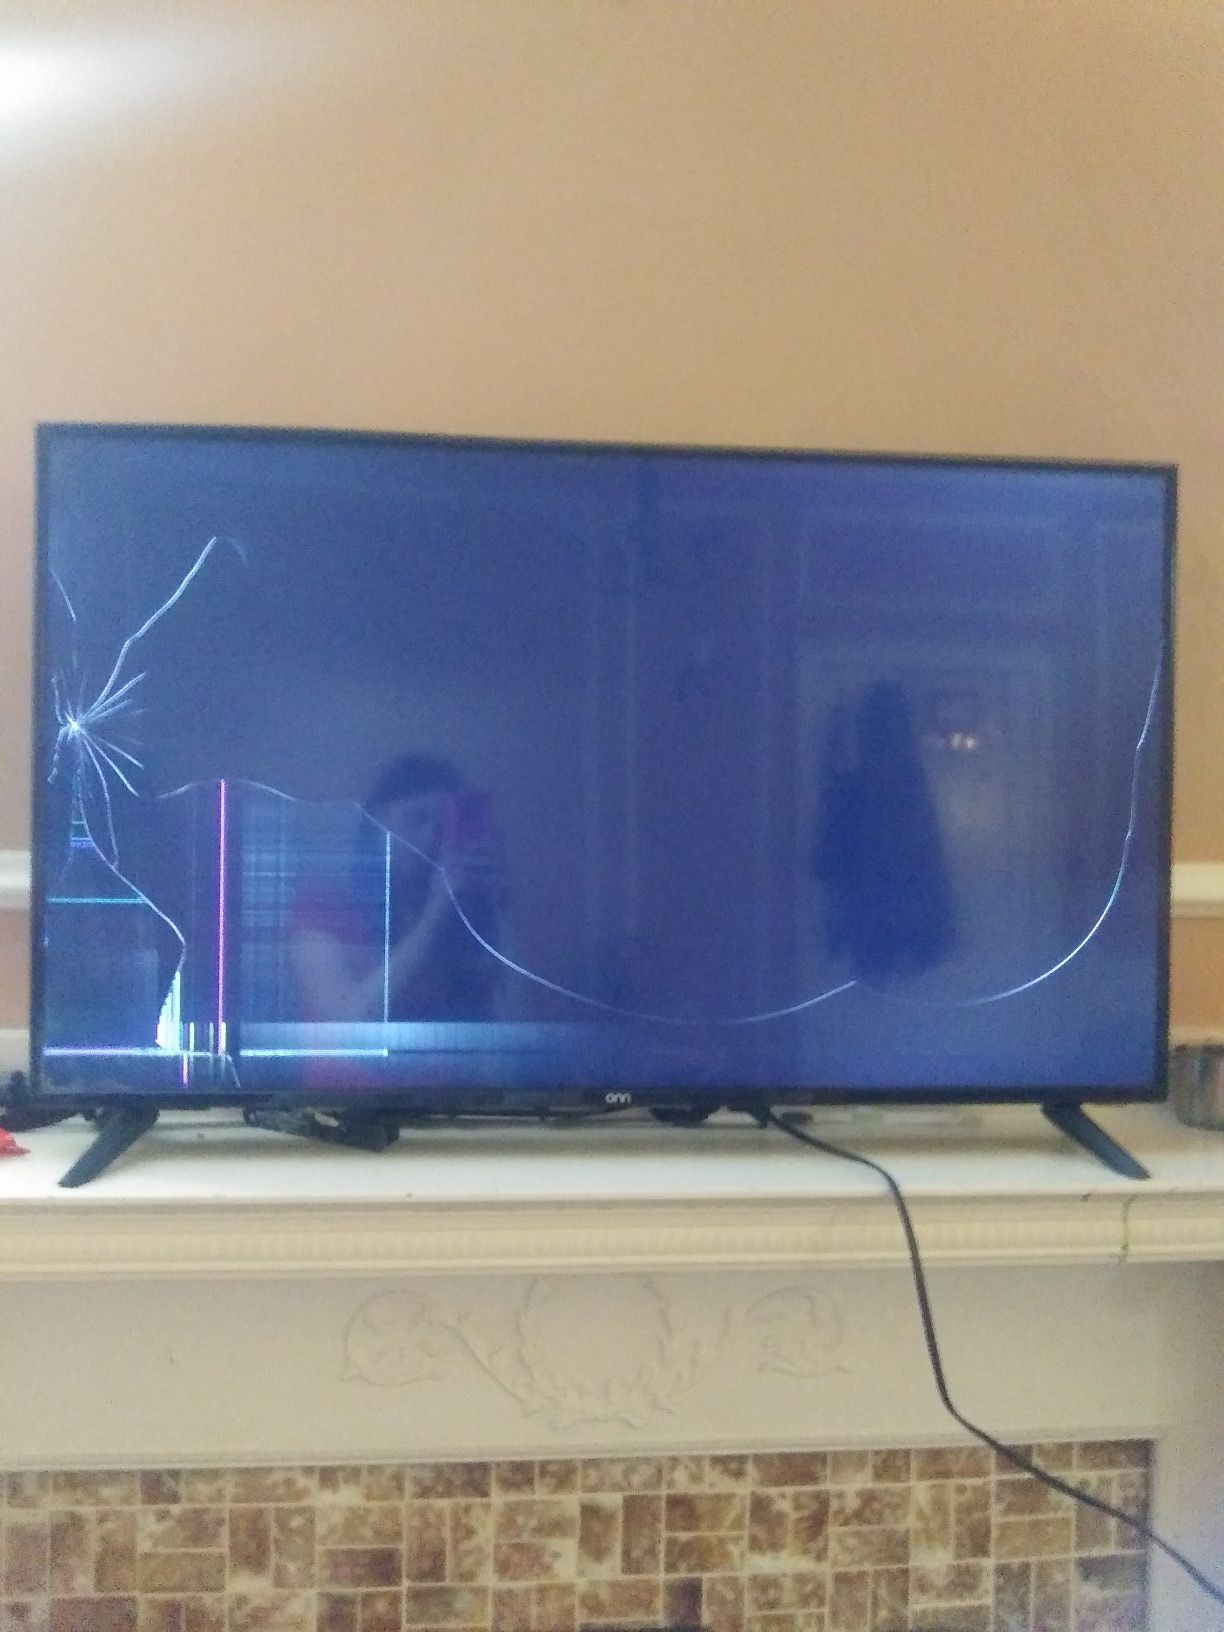 43" LED Onn flat screen (for parts or possibly fixed)